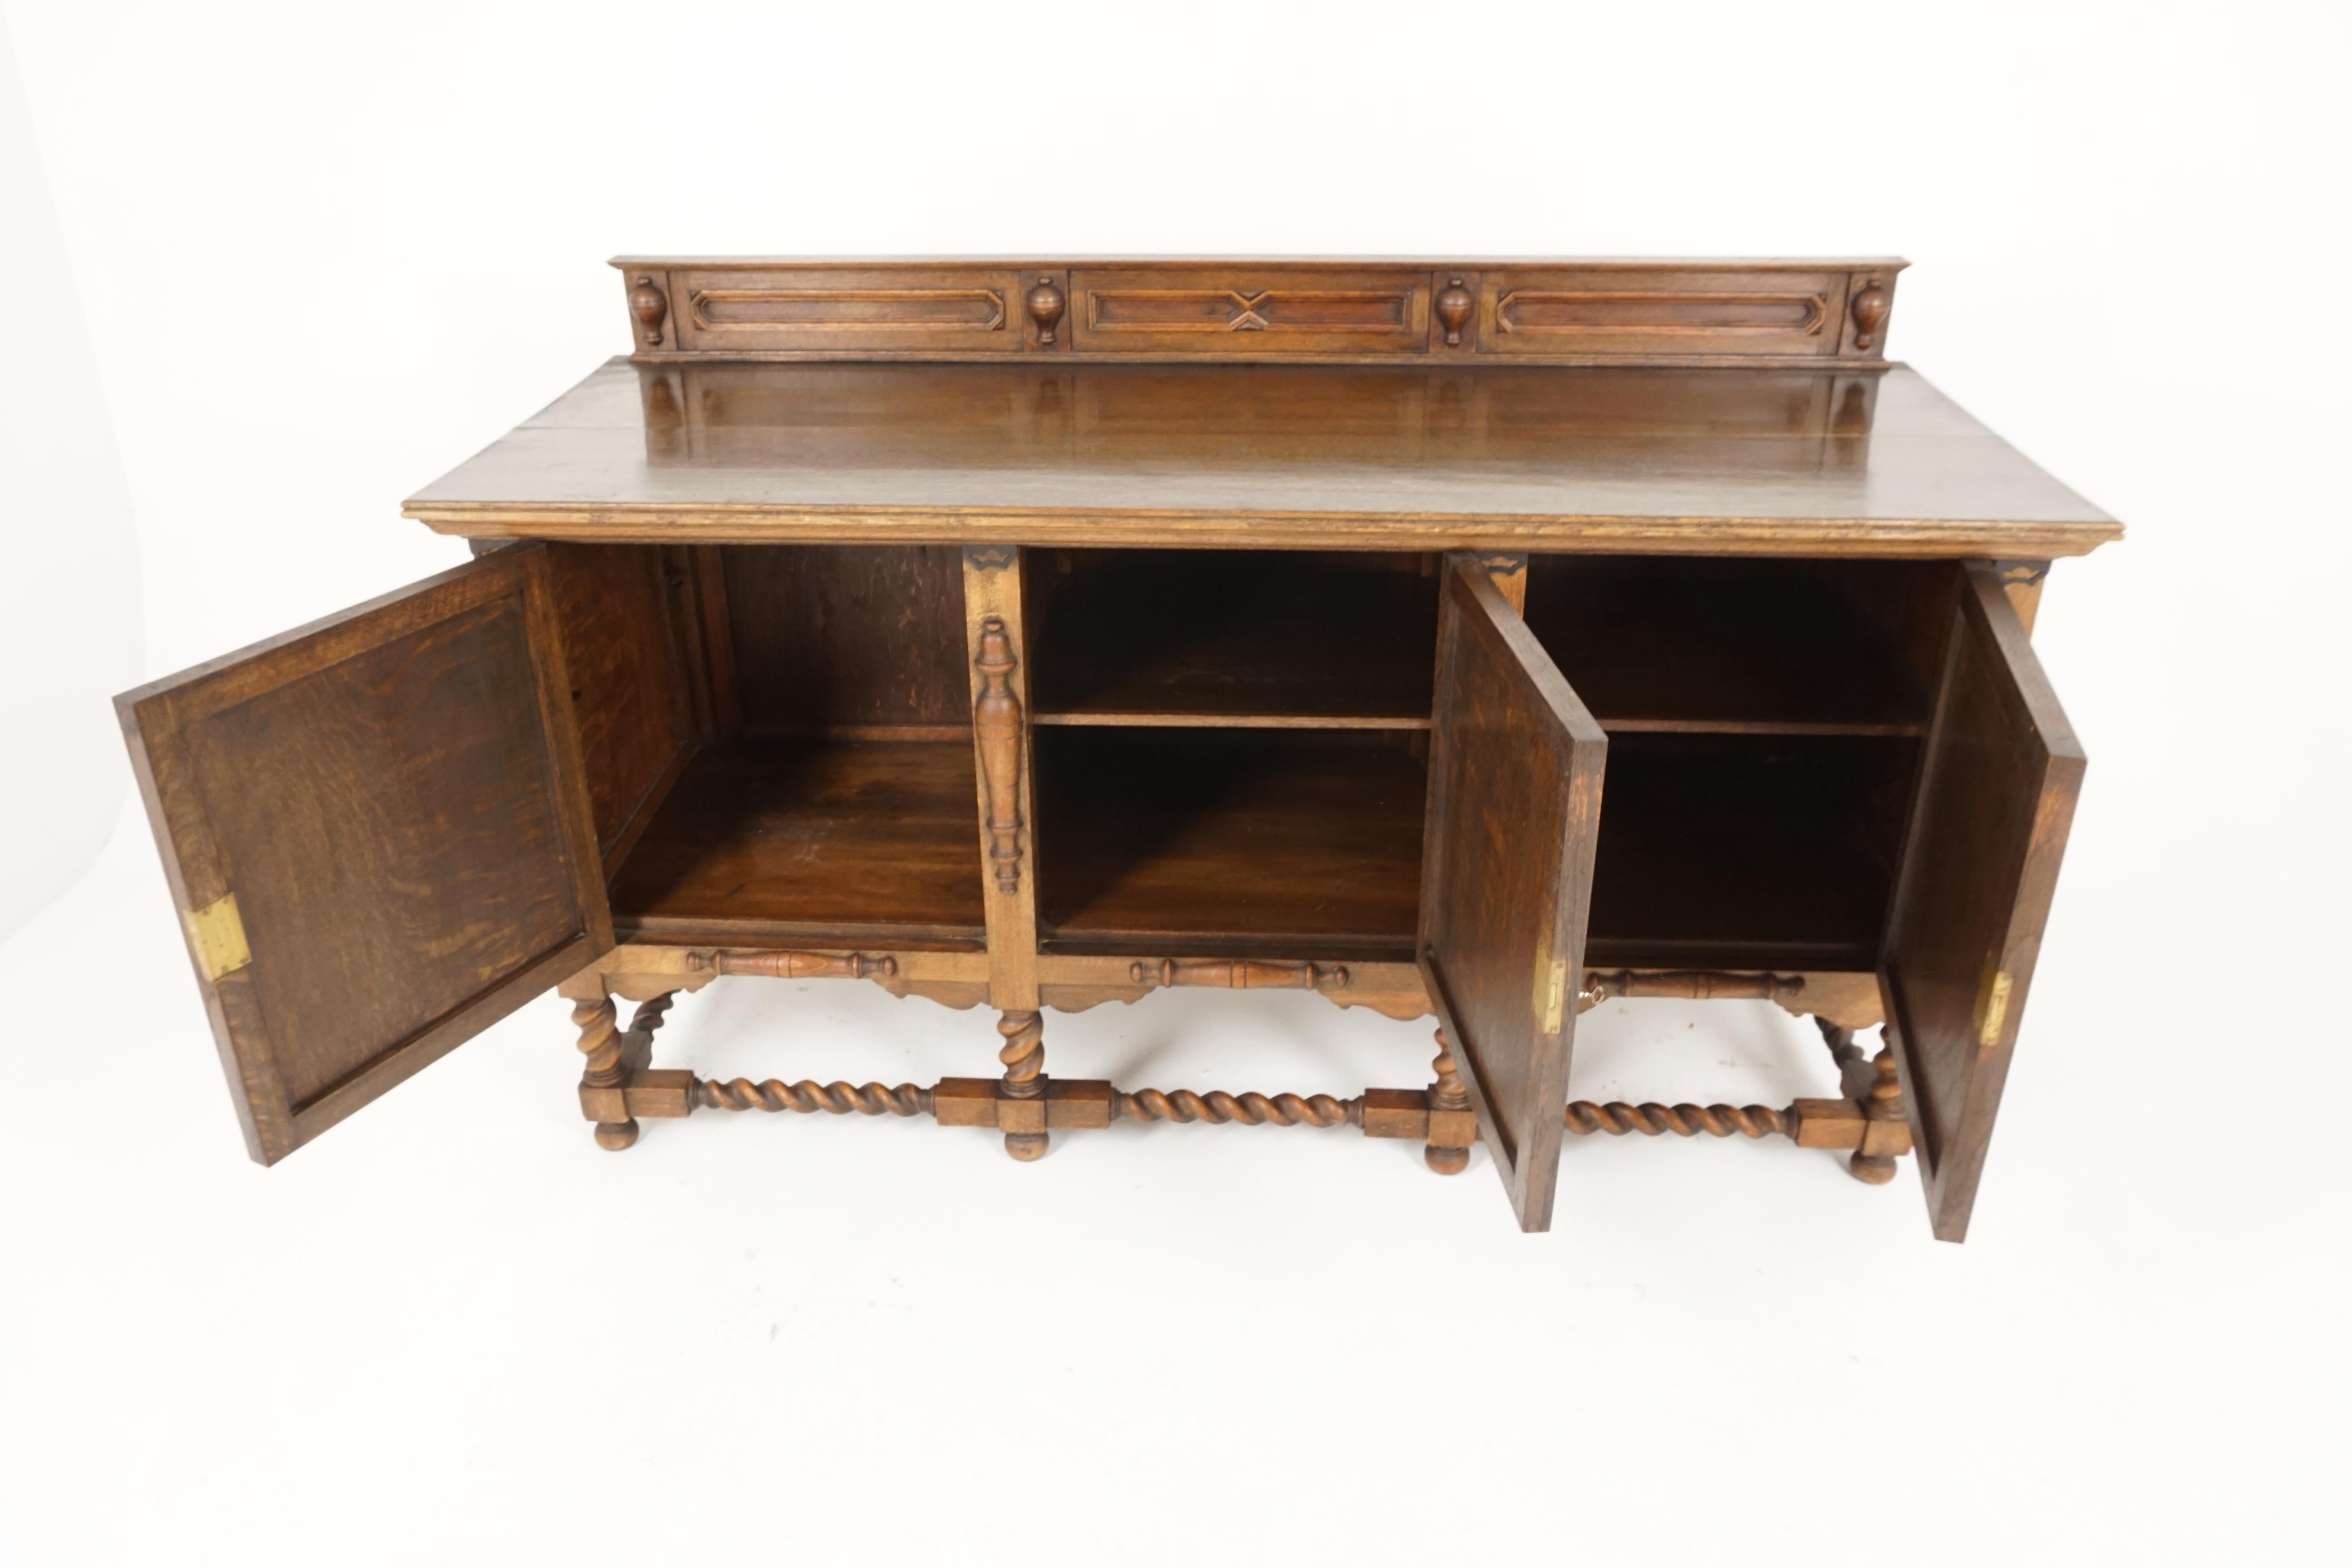 Antique tiger oak barley twist sideboard buffet, Scotland 1920, B2142

Scotland, 1900
Solid oak 
Original finish
Carved pediment on back
Rectangular top with moulded edges
Central paneled door with single fixed shelf interior
Flanked by a